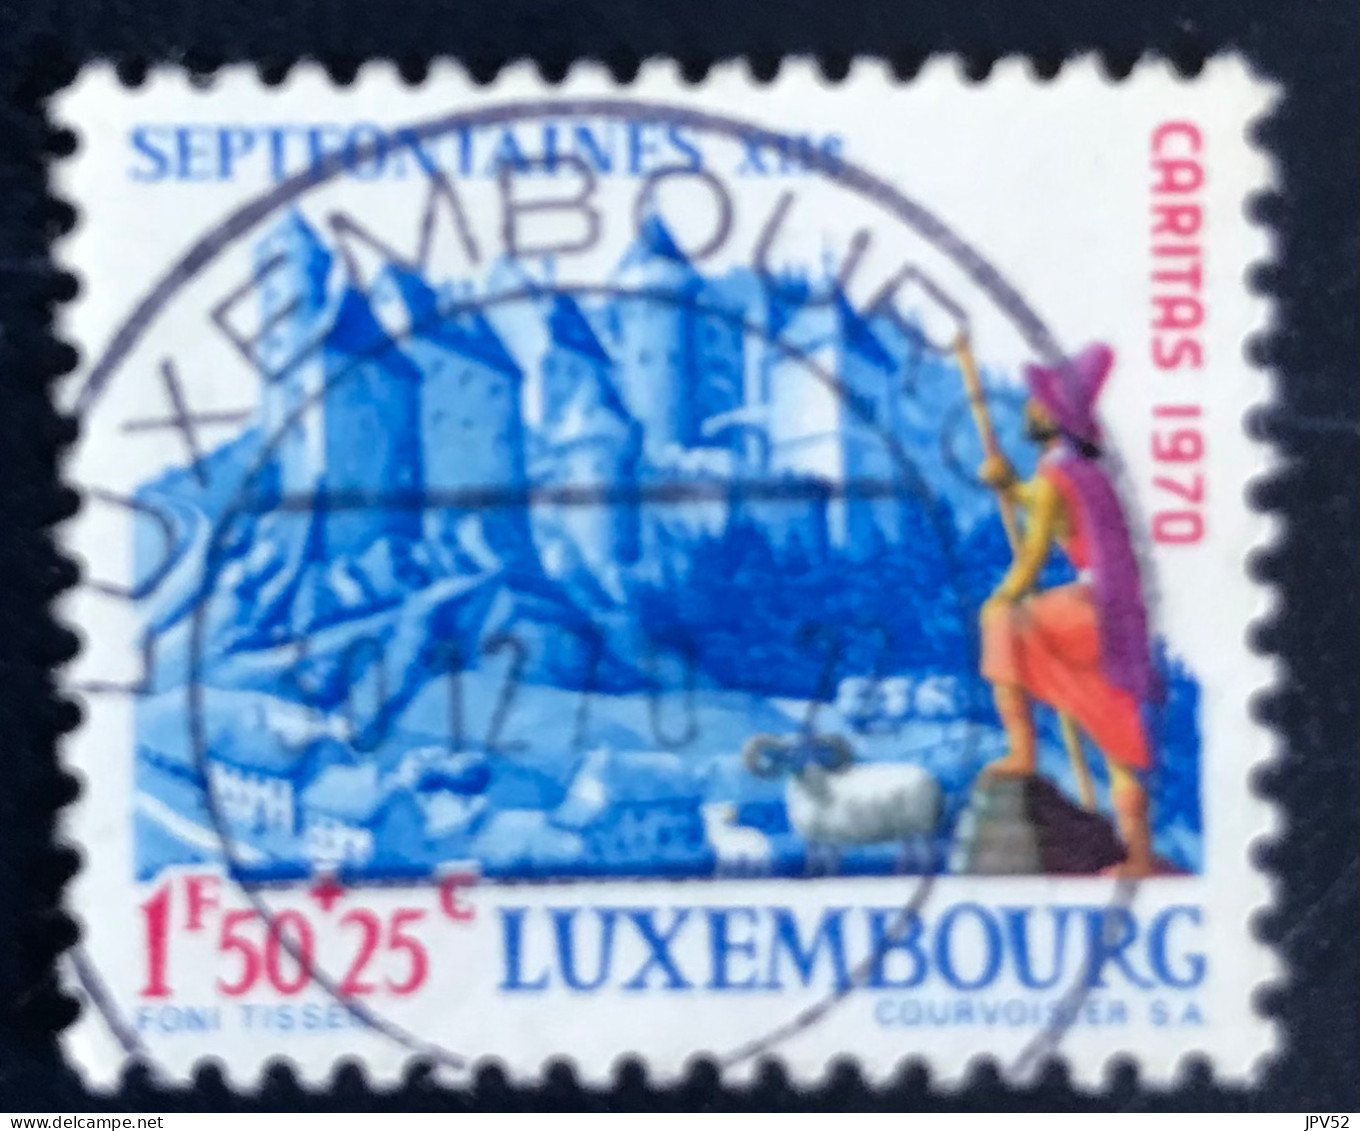 Luxembourg - Luxemburg - C18/34 - 1970 - (°)used - Michel 815 - Burcht Van Septfontaines - LUXEMBOURG - Gebraucht